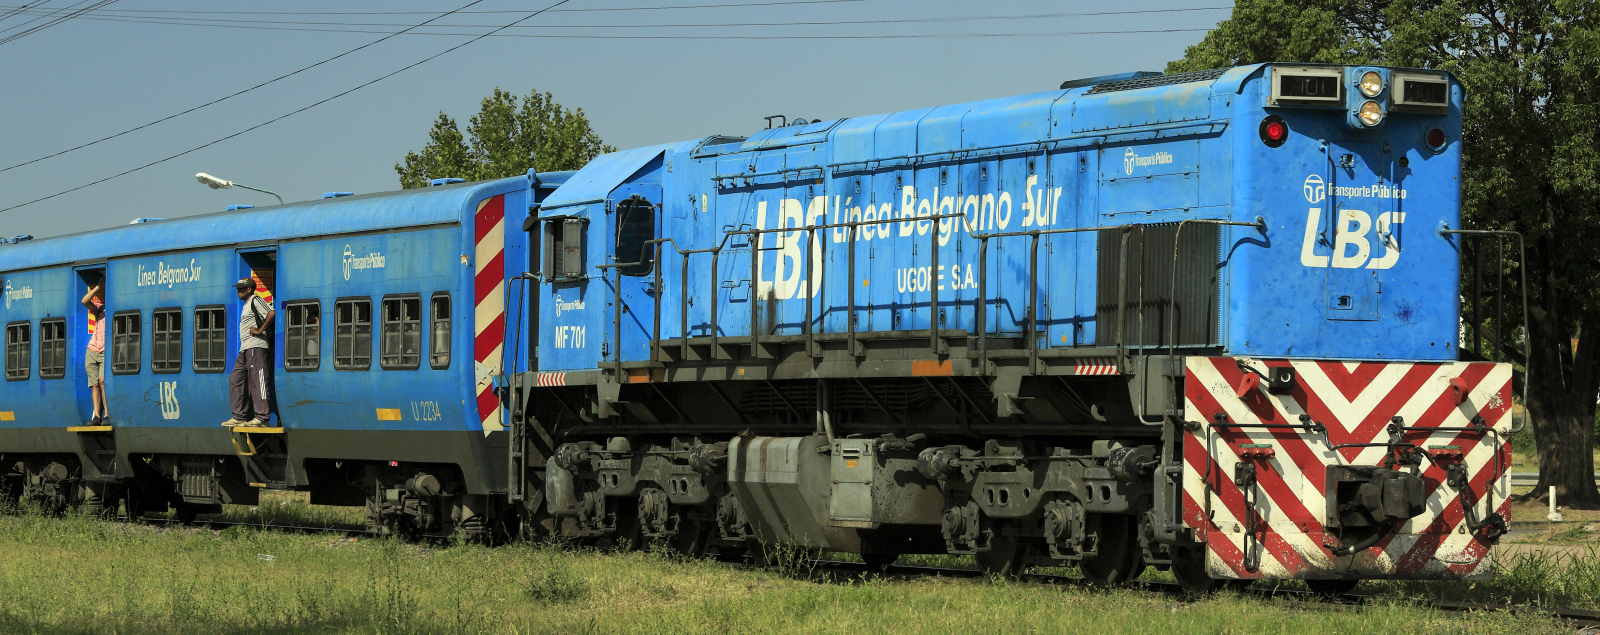 Línea Belgrano Sur MF701, a G22CU-2, with a commuter train at Libertad near Buenos Aires in February 2018